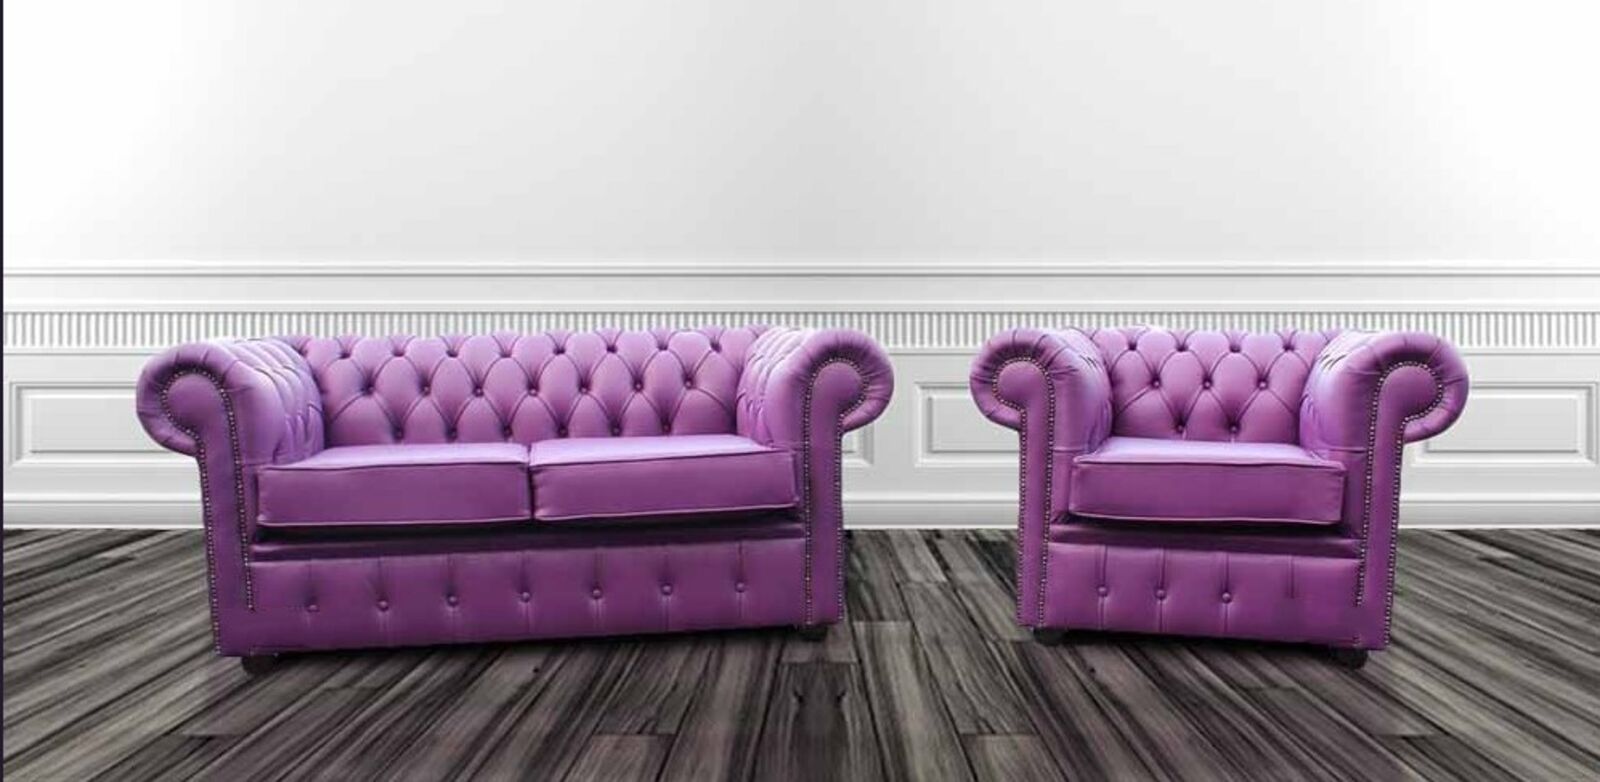 Product photograph of Chesterfield 2 Seater 1 Seater Club Chair Wineberry Purple Leather Sofa Offer from Designer Sofas 4U